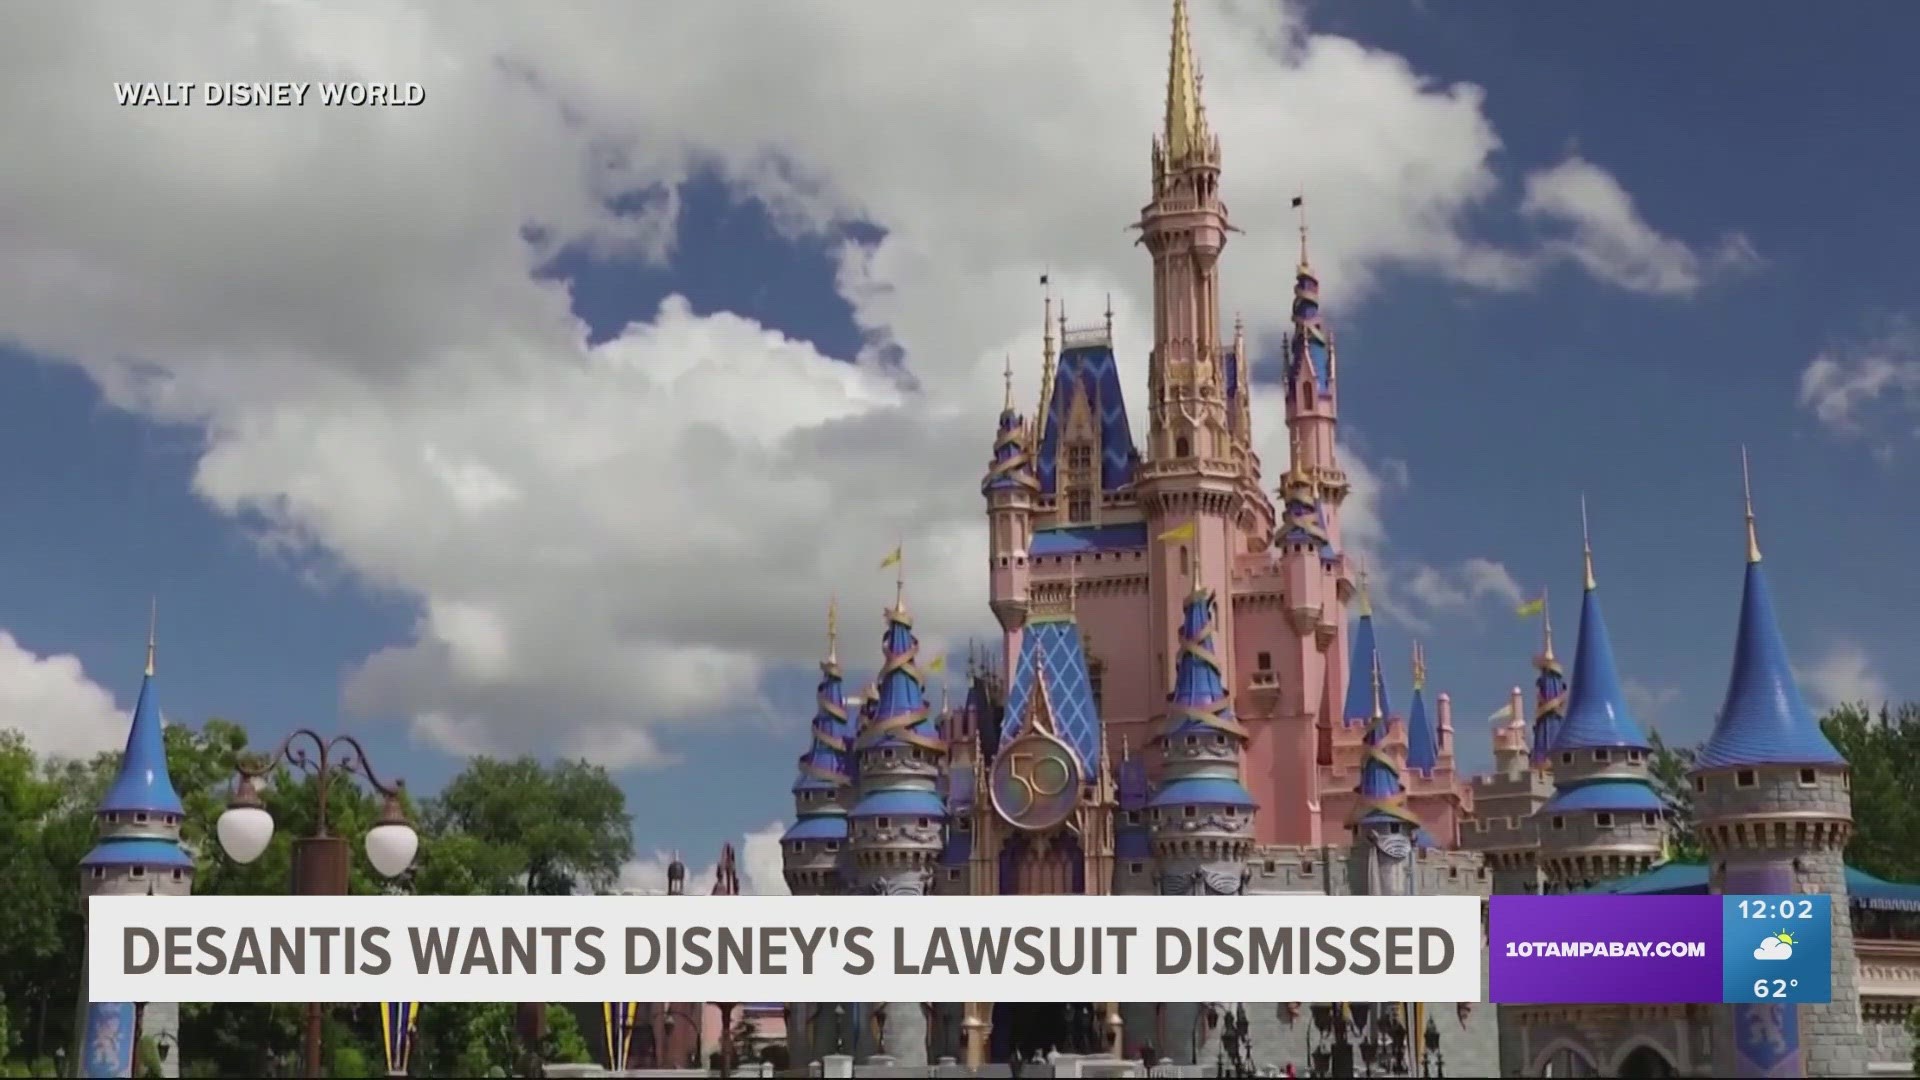 Tuesday's hearing marks the first oral arguments in federal court over Disney’s claim that DeSantis used state powers to punish them.